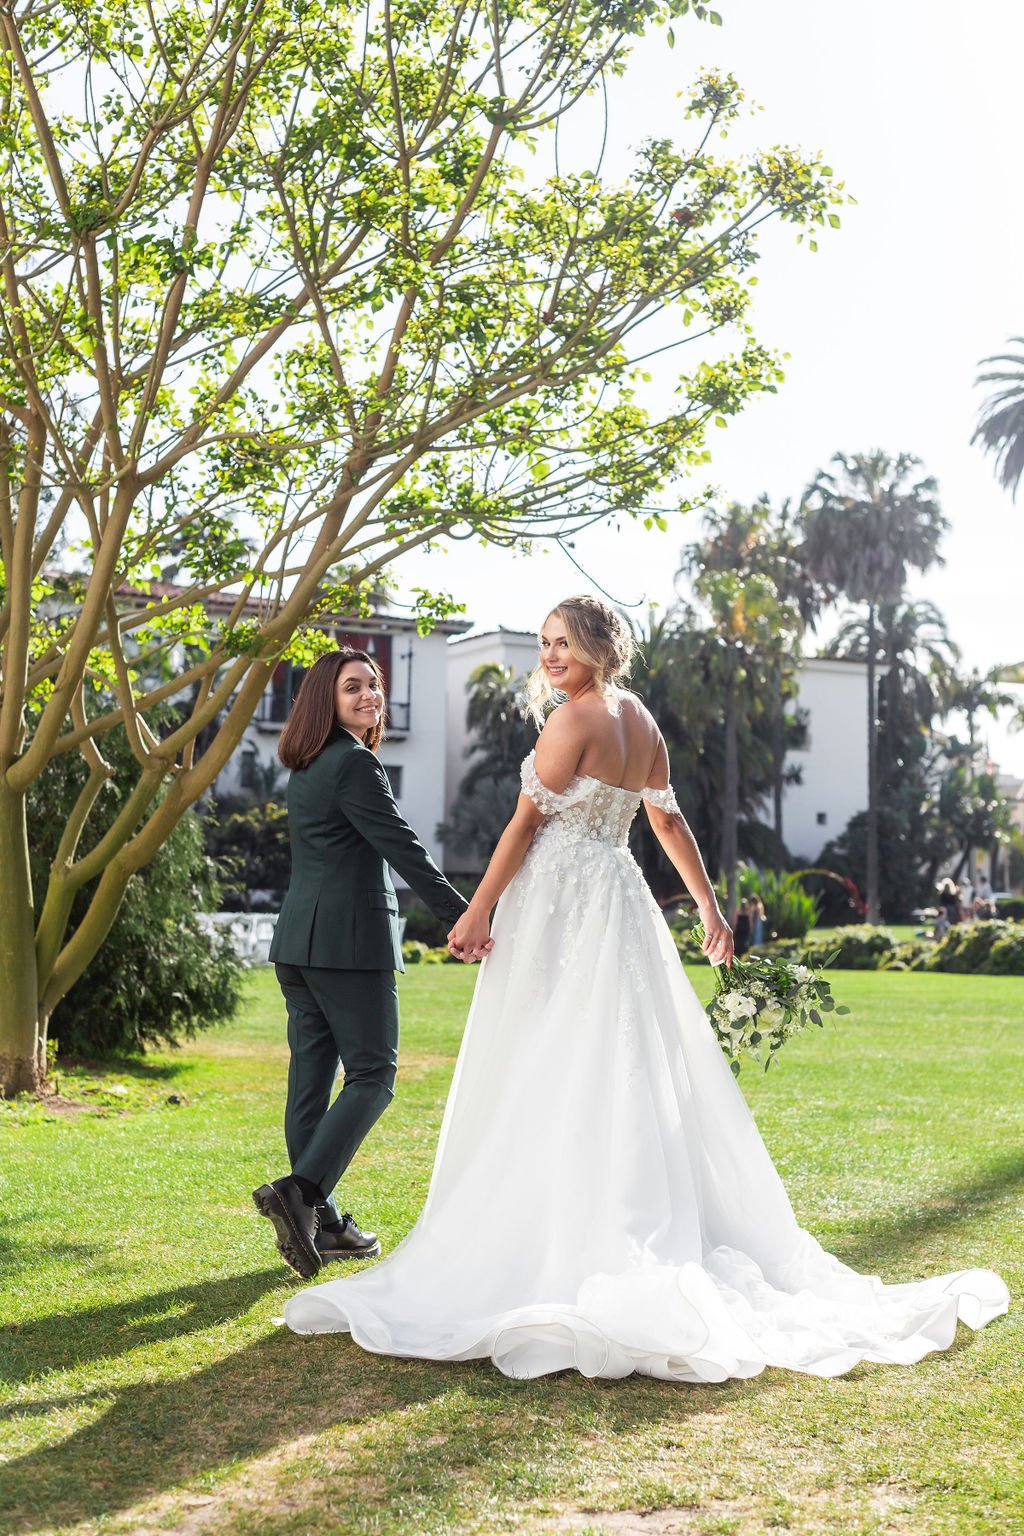 www.santabarbarawedding.com | Weddings by the Sea | Santa Barbara Courthouse | Kevin Qian | Cate Forest Designs | Couple on Courthouse Lawn